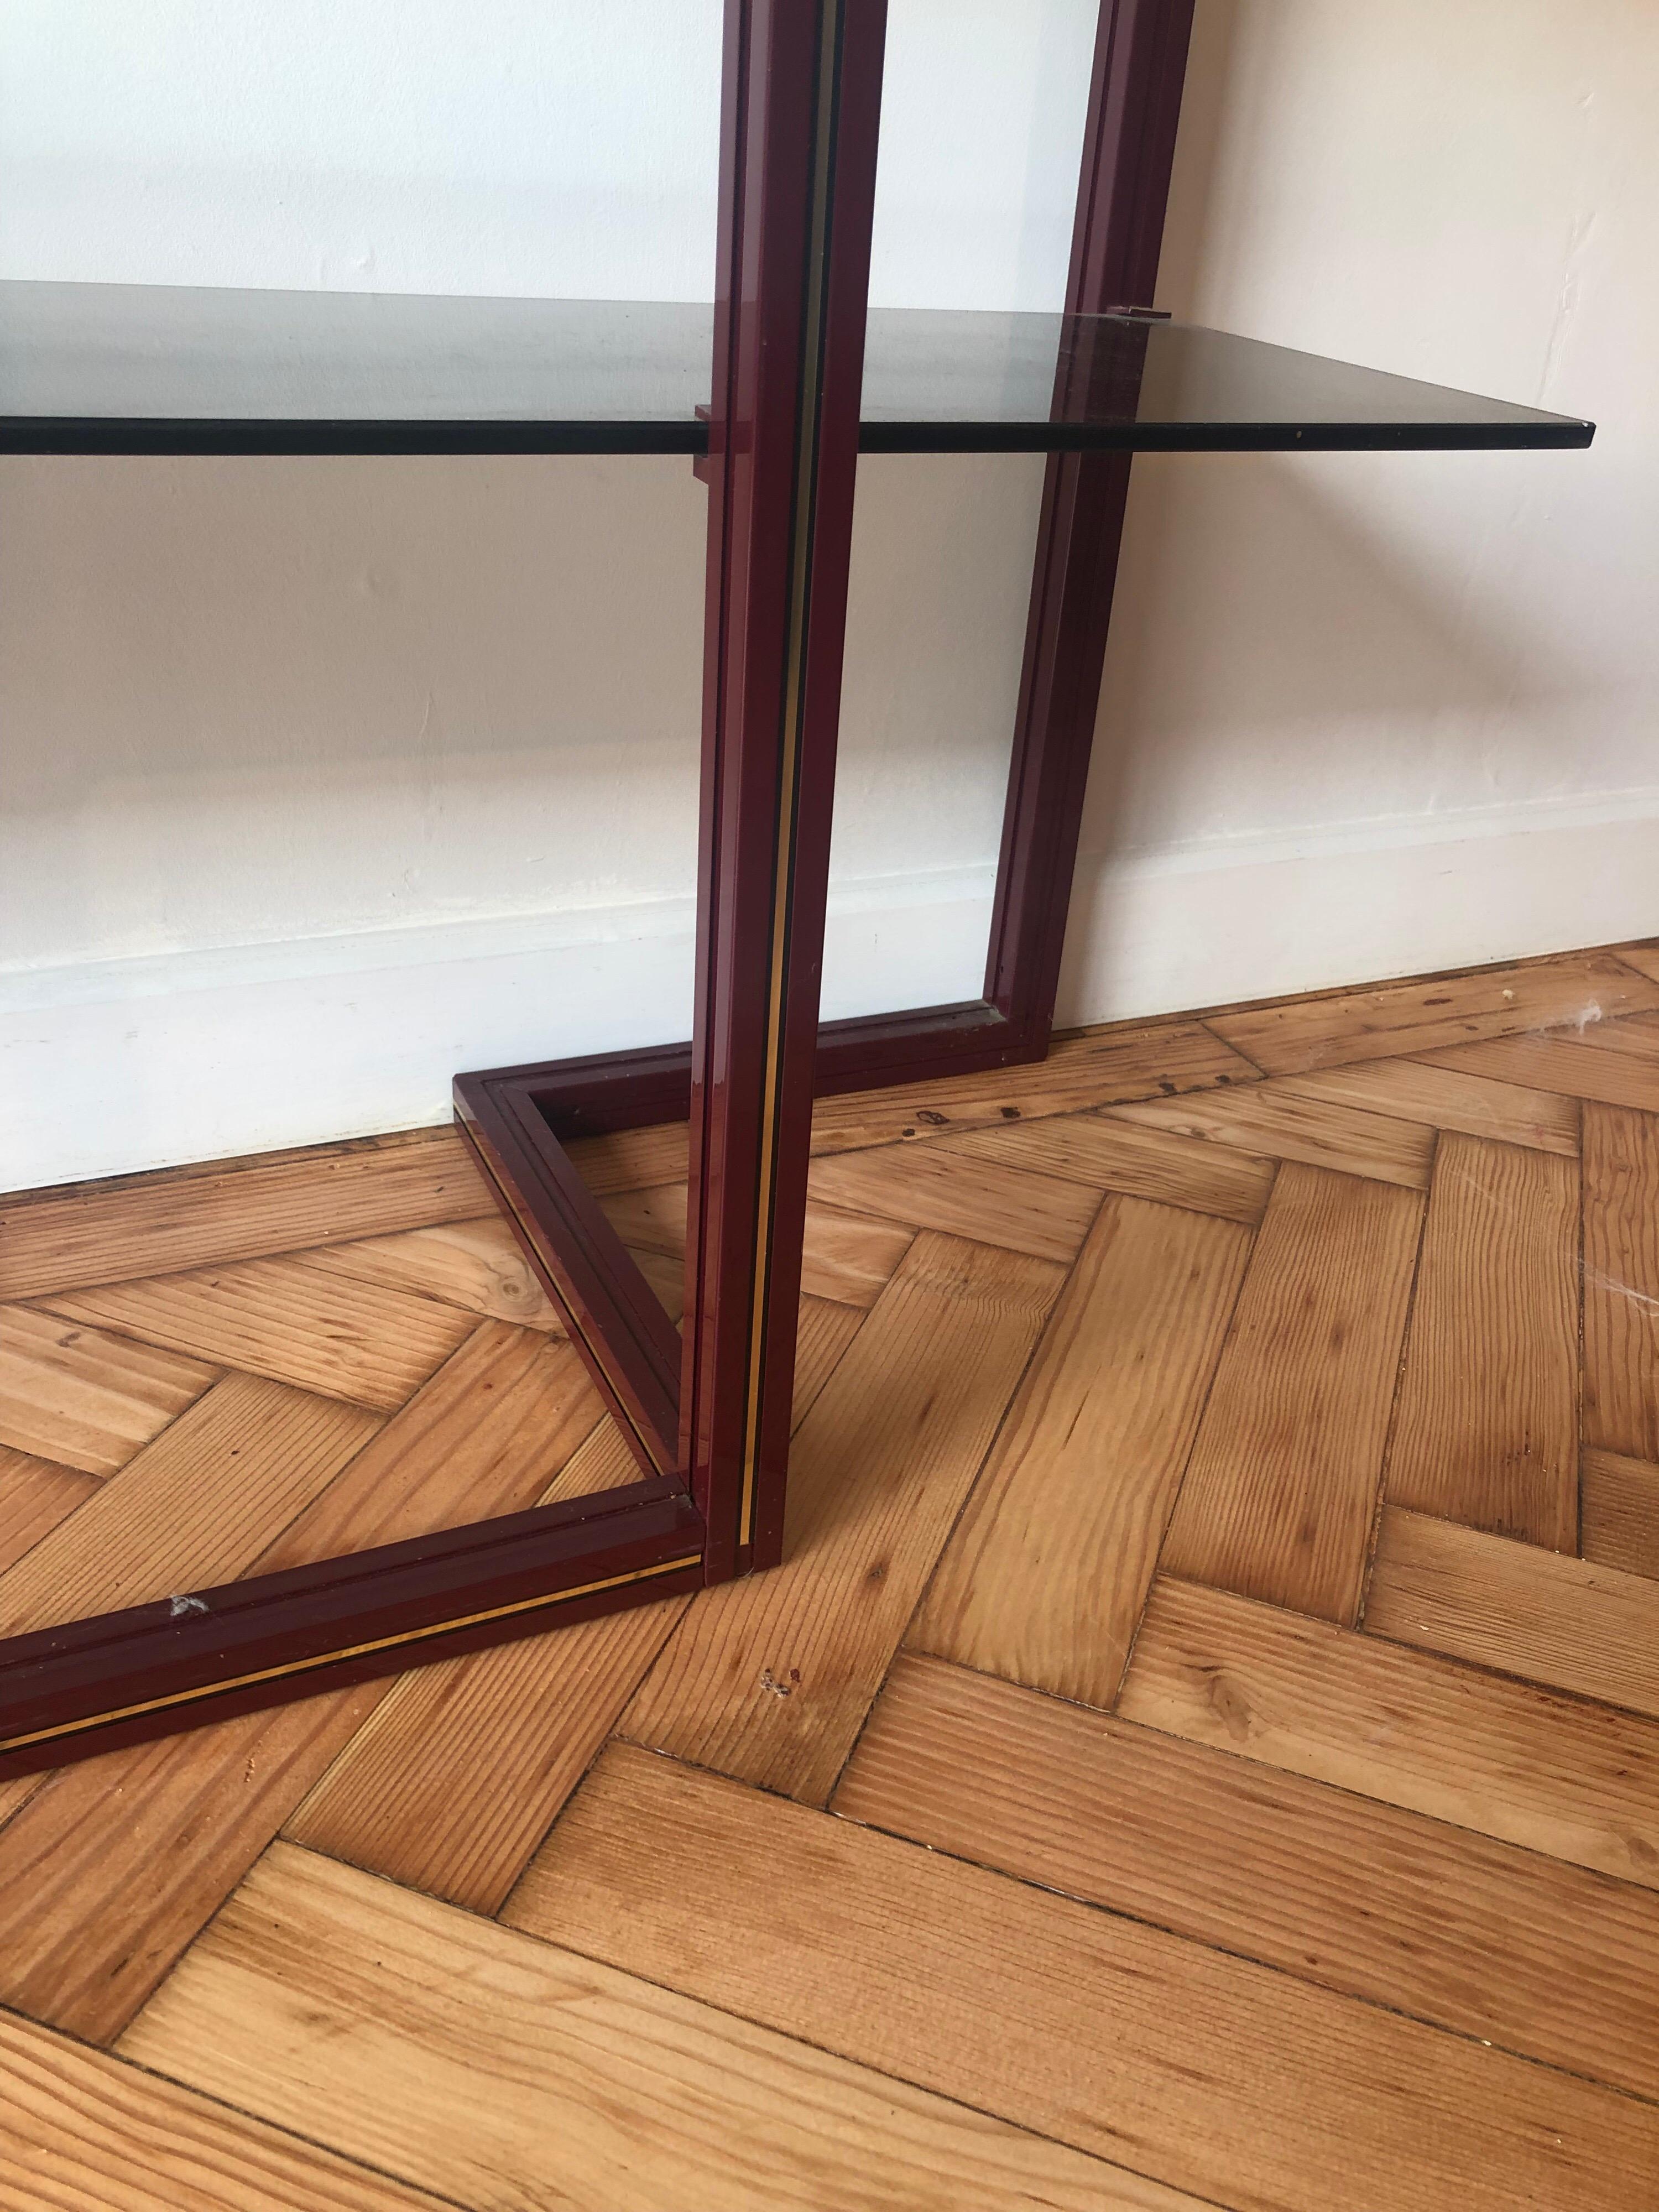 Vintage Burgundy 1970s Pierre Vandel Smoked Glass Étagère Shelving Display Unit In Good Condition For Sale In London, GB